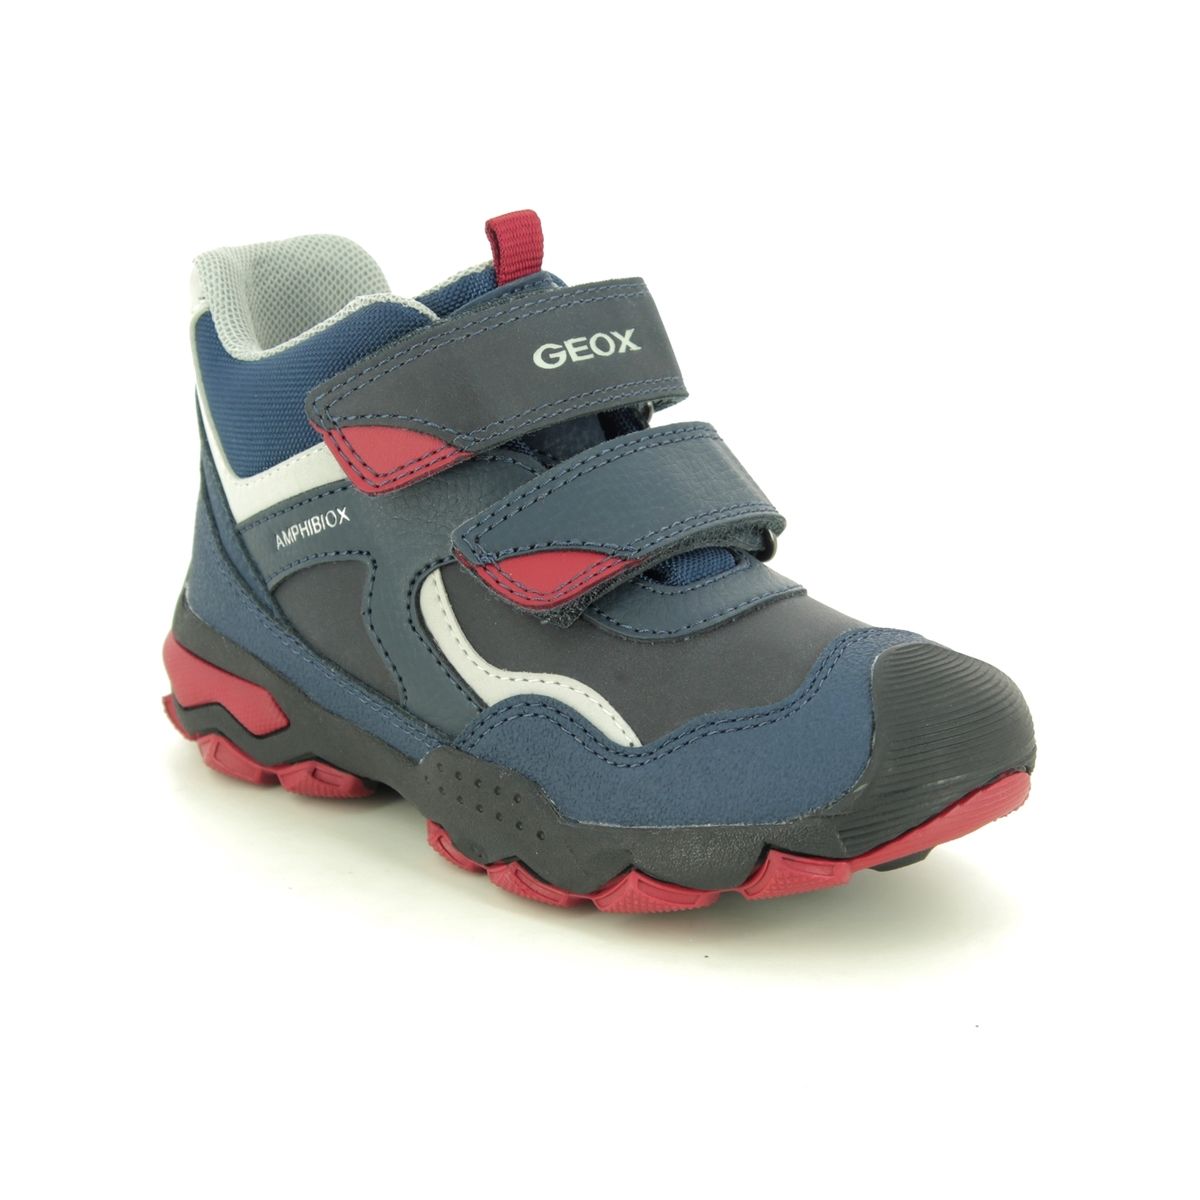 Geox - Buller Boy Tex (Navy Red) J049Wb-C4244 In Size 26 In Plain Navy Red For kids